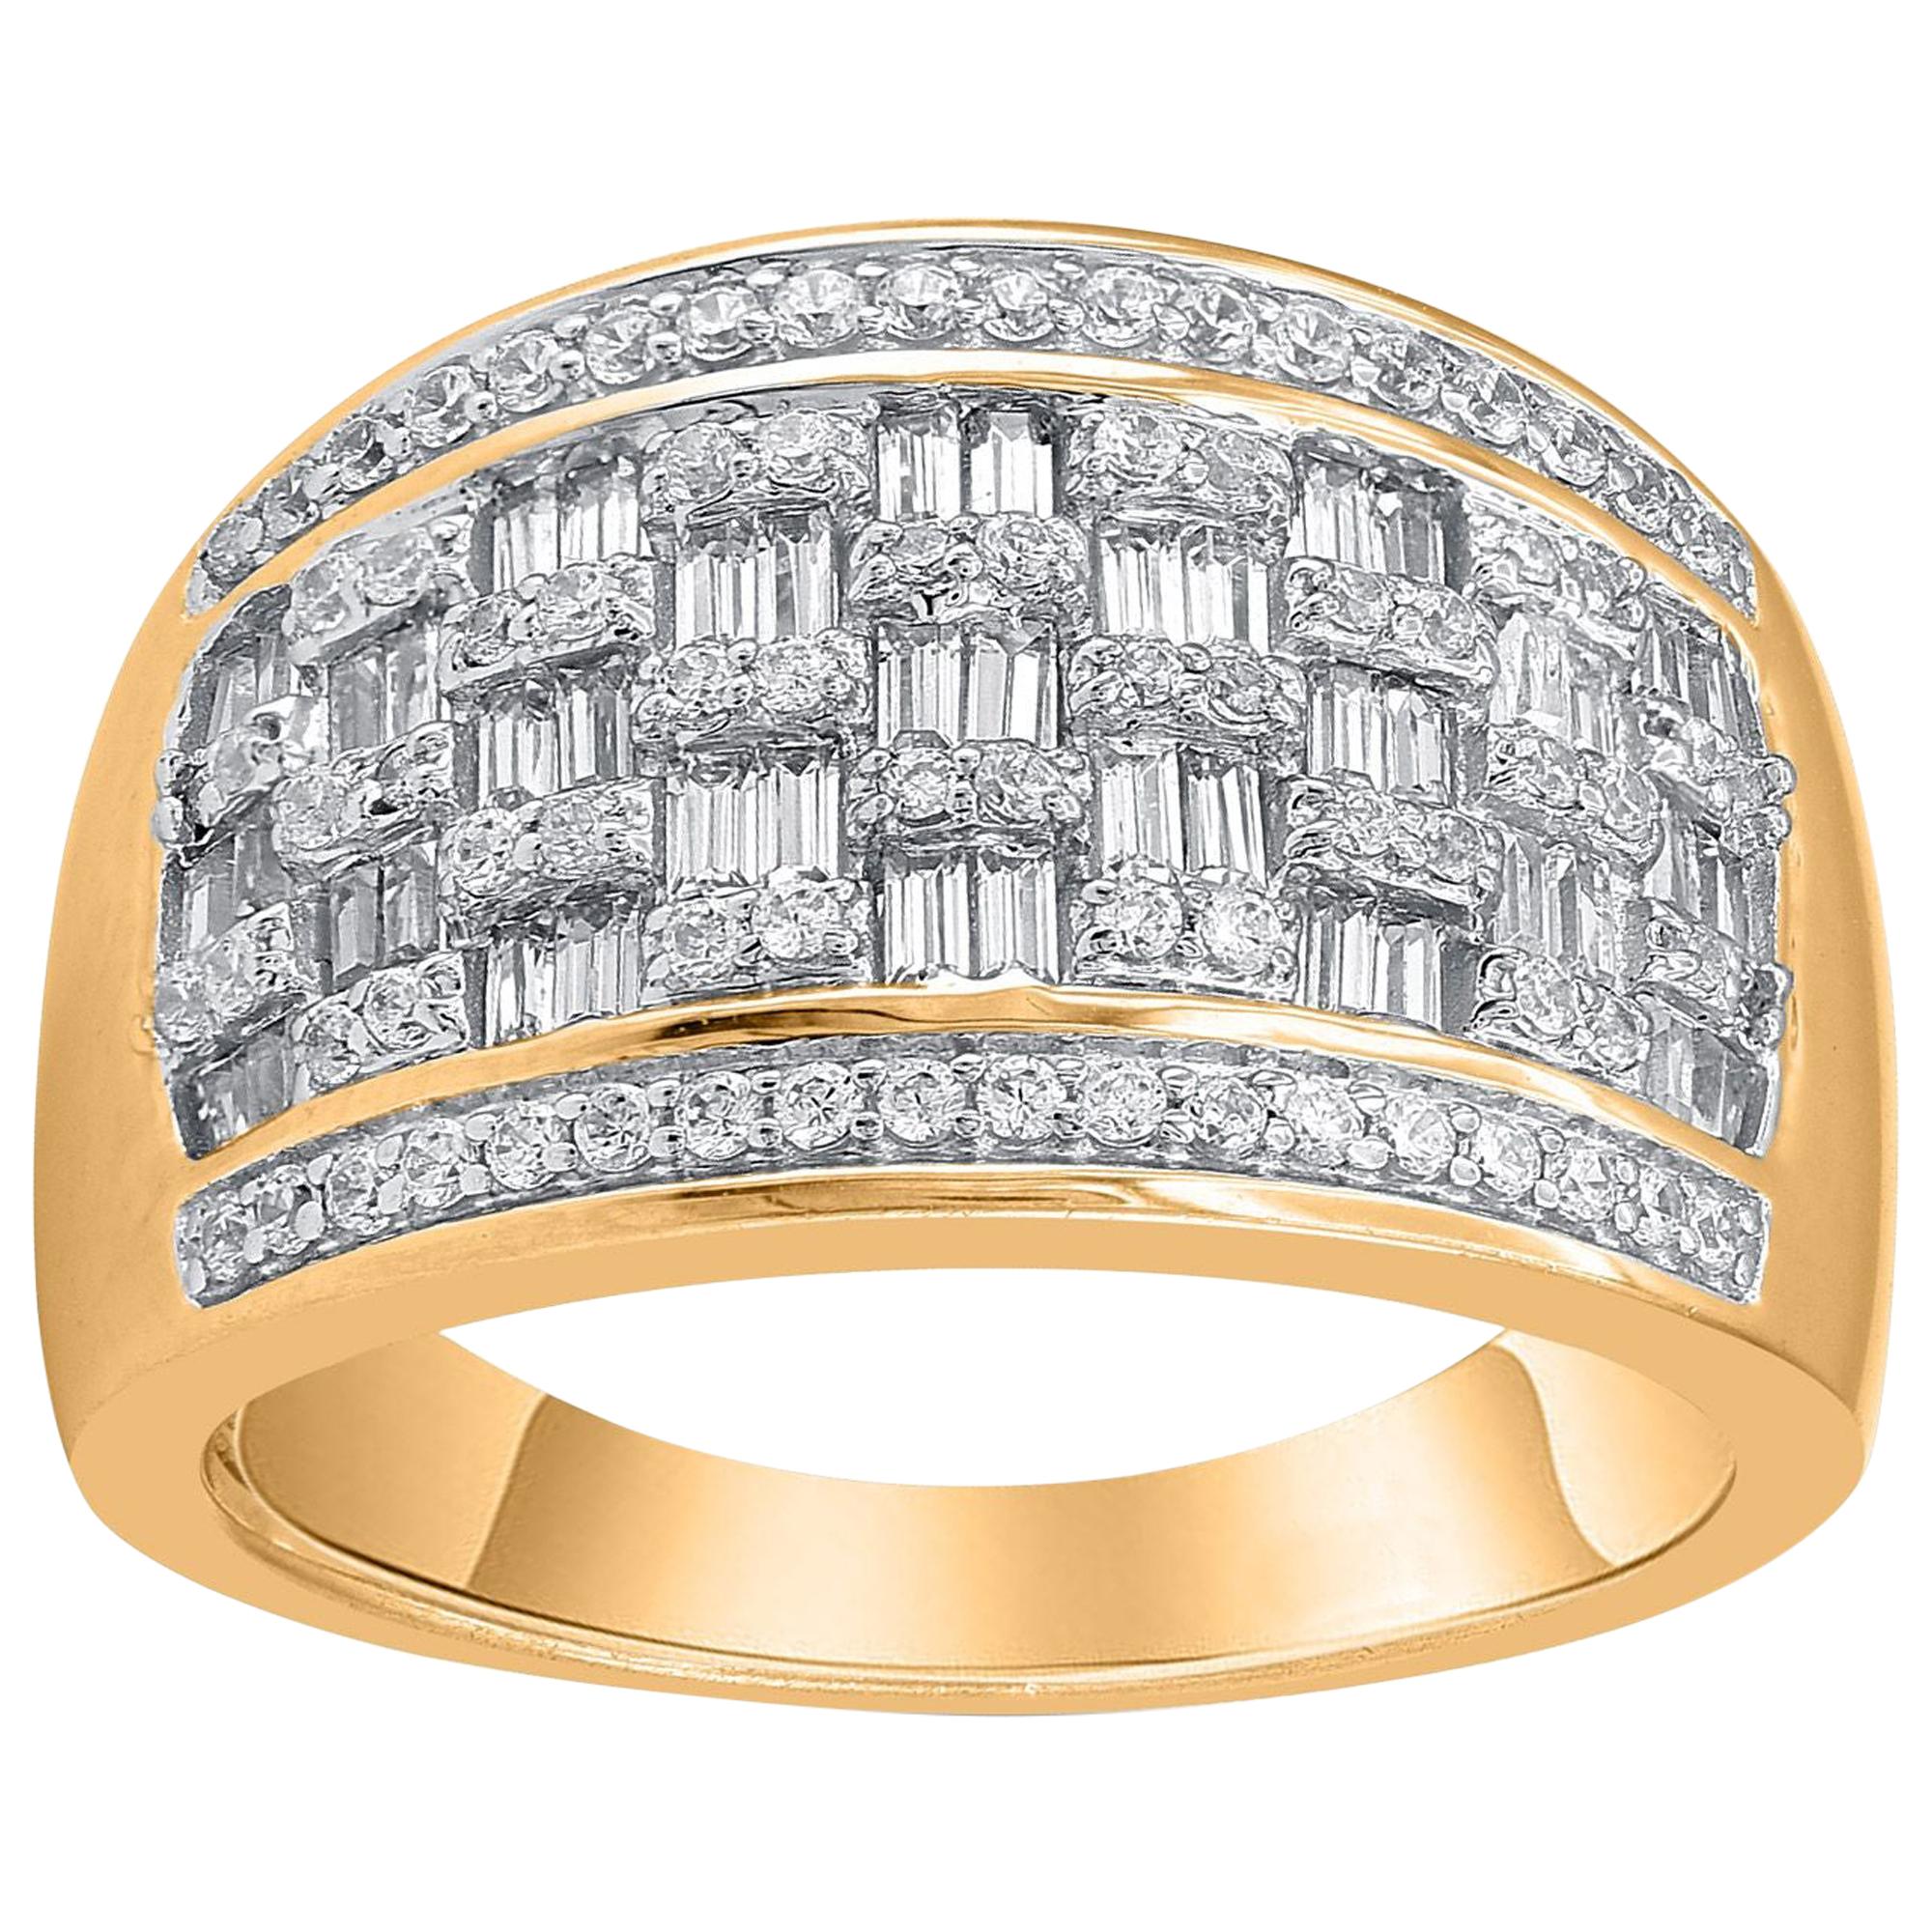 TJD 1.00 Carat Round and Baguette Diamond 10 Karat Yellow Gold Chequered Ring